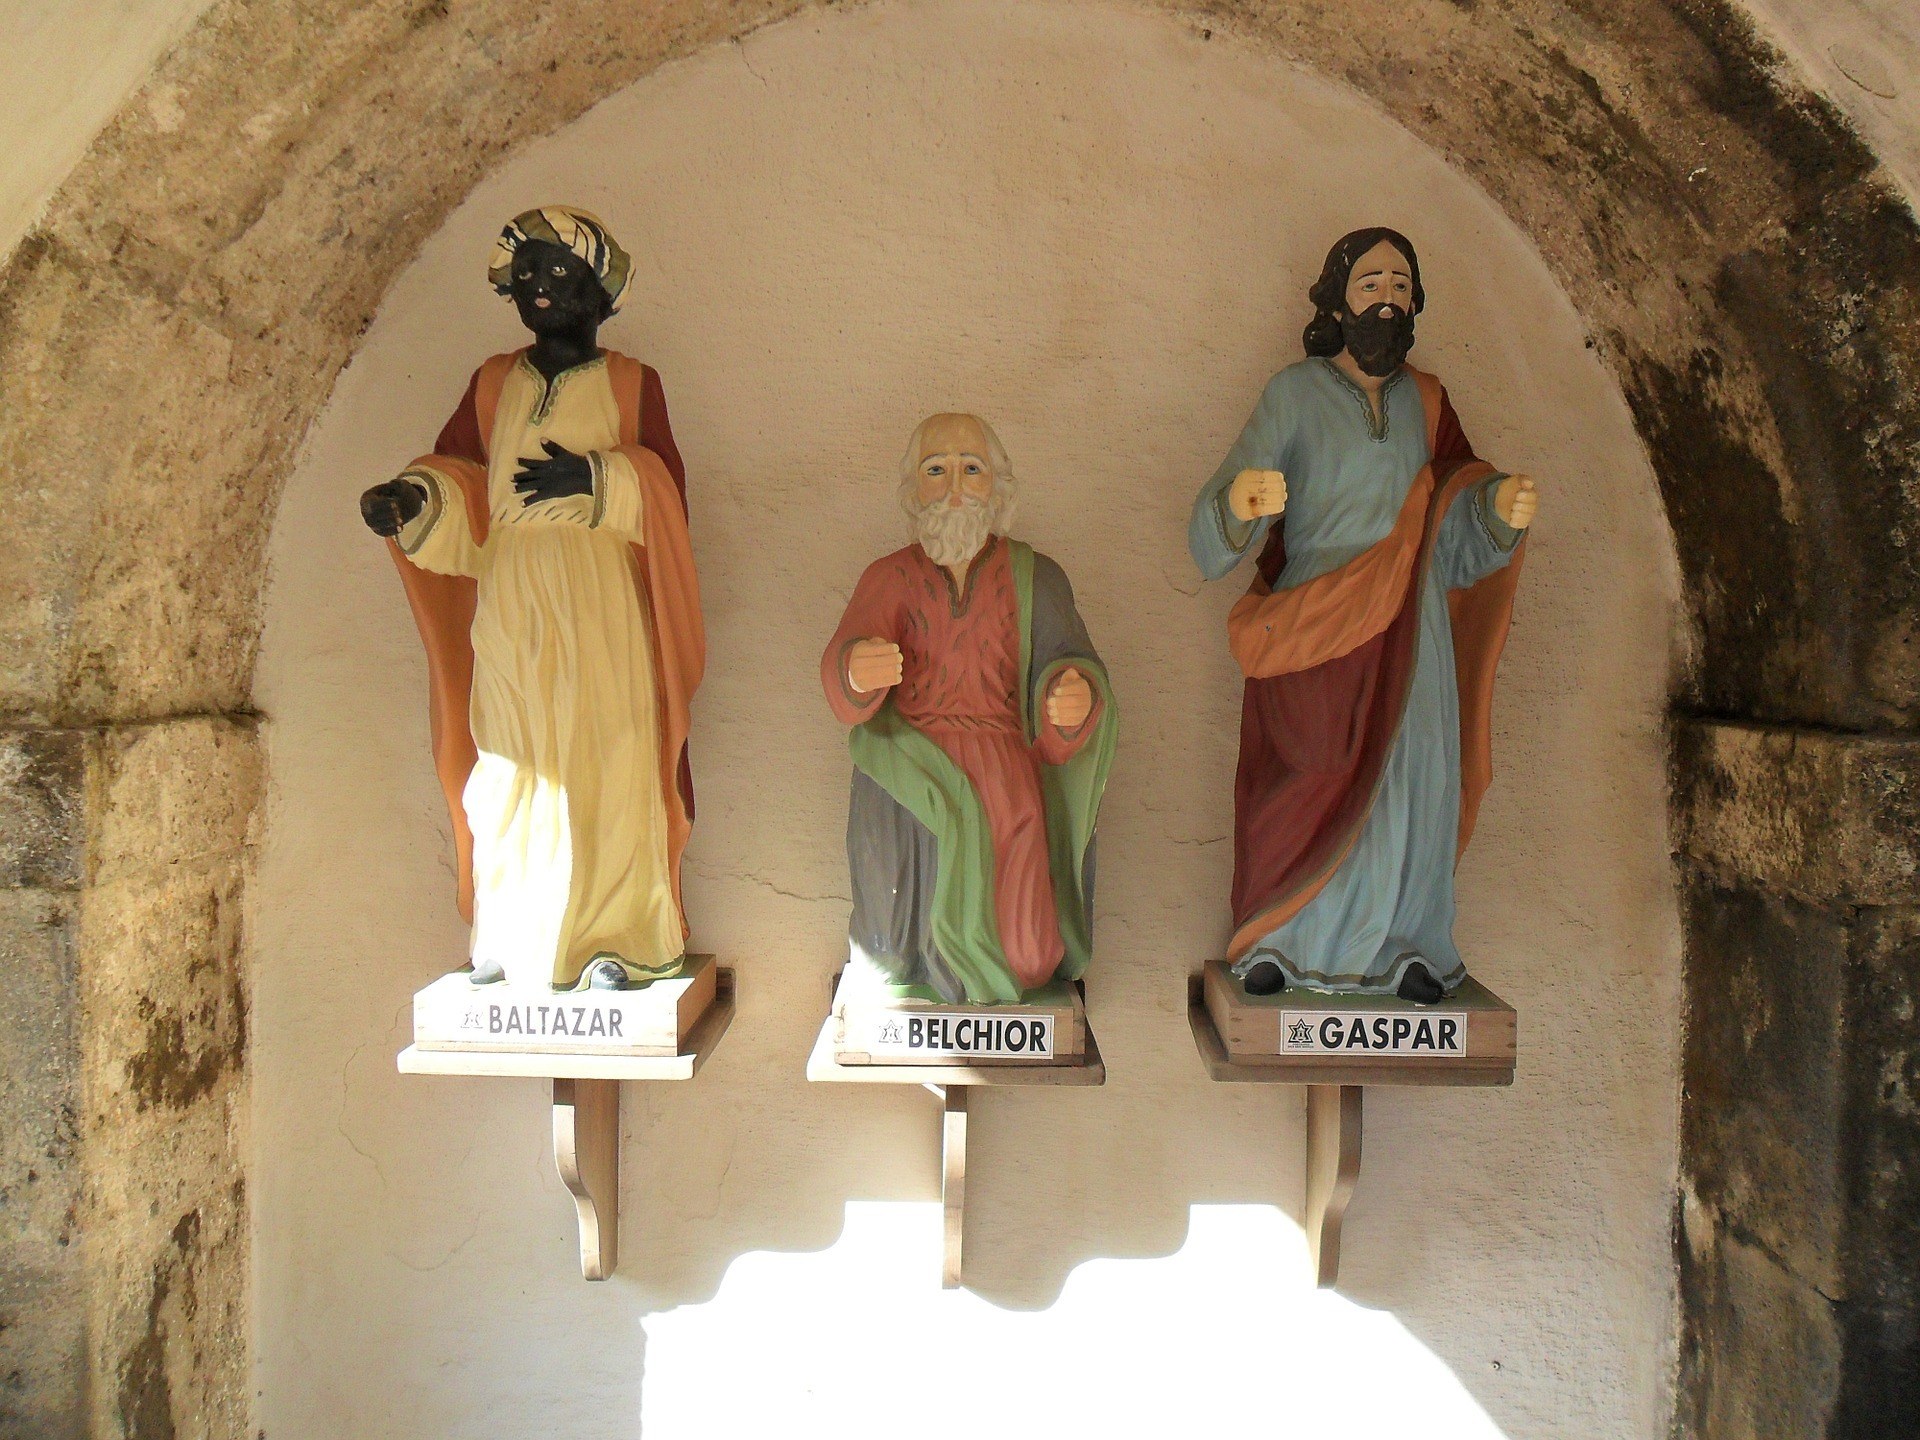 Who are The Three Wise Men? - reyes magos